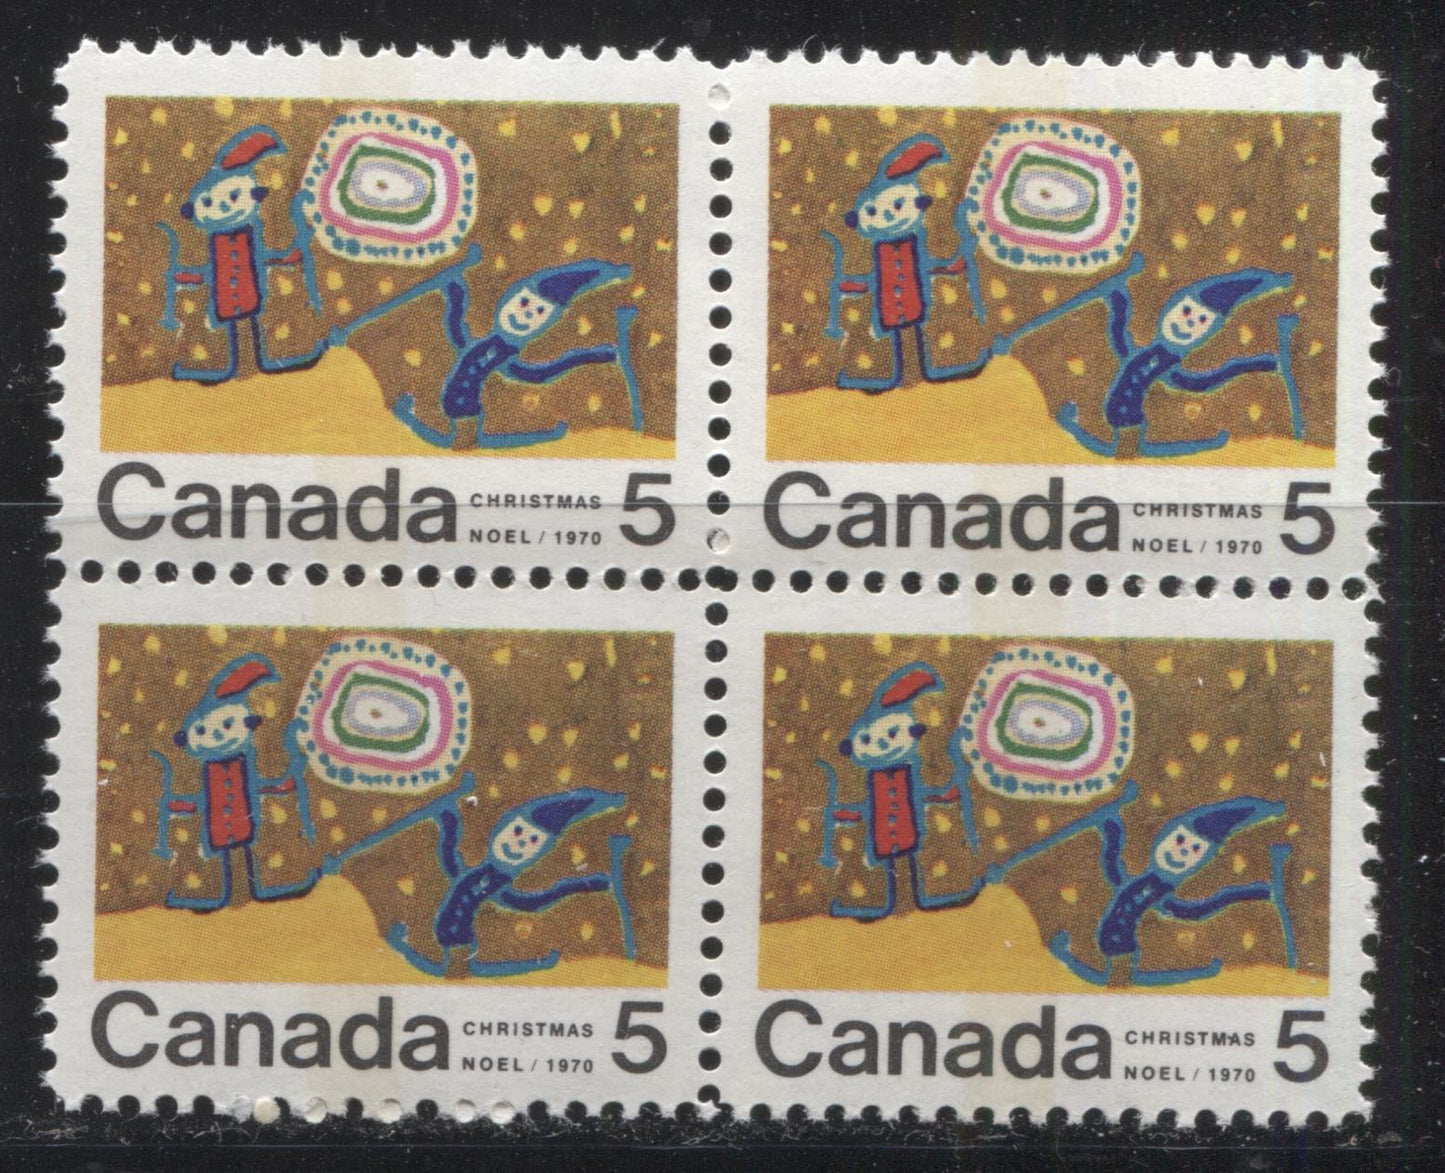 Lot 127 Canada #522pii 5c Multicoloured Children Skiing, 1970 Christmas Issue, a VFNH Winnipeg Tagged Centre Block of 4 on HB11 Ribbed Paper, With Dot Between "MA" of "Christmas" on LR Stamp, Perf. 11.95 x 11.9